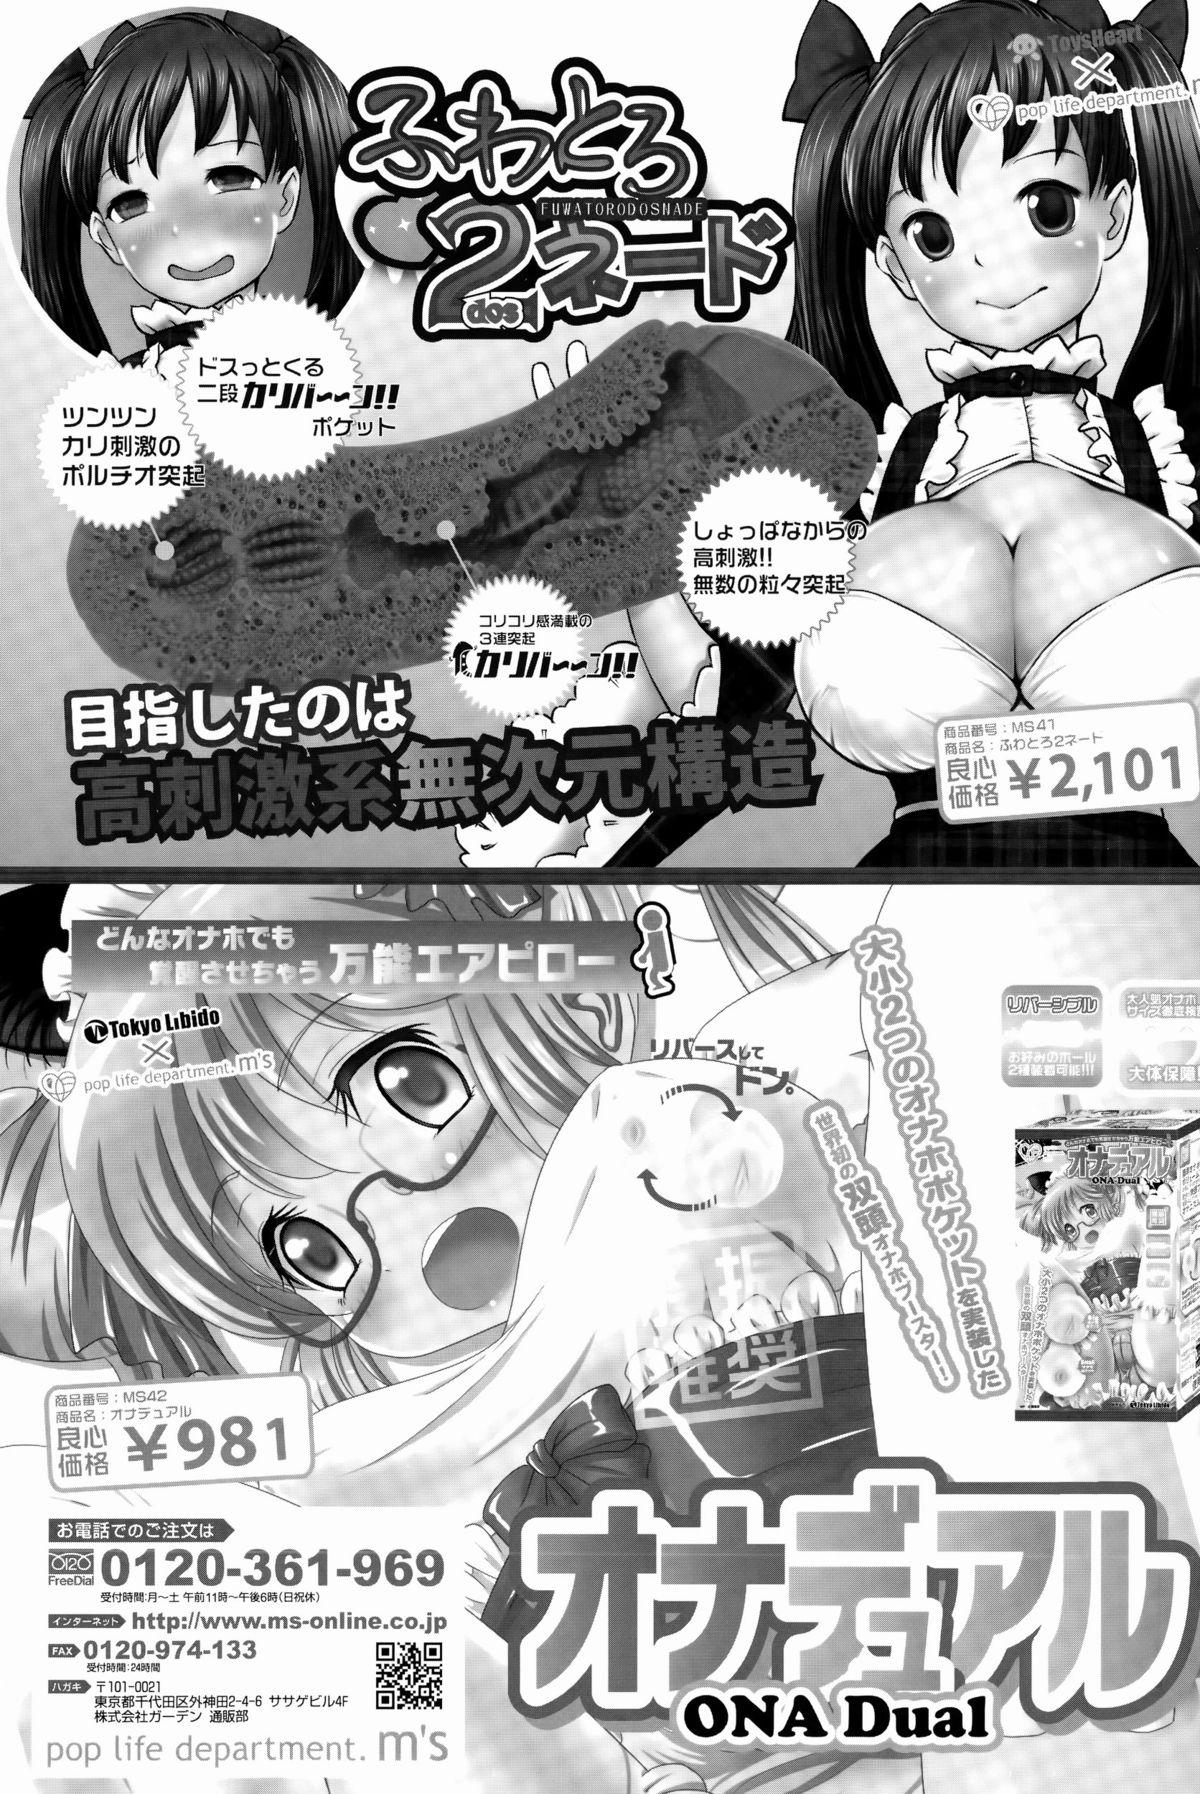 BUSTER COMIC 2015-05 422